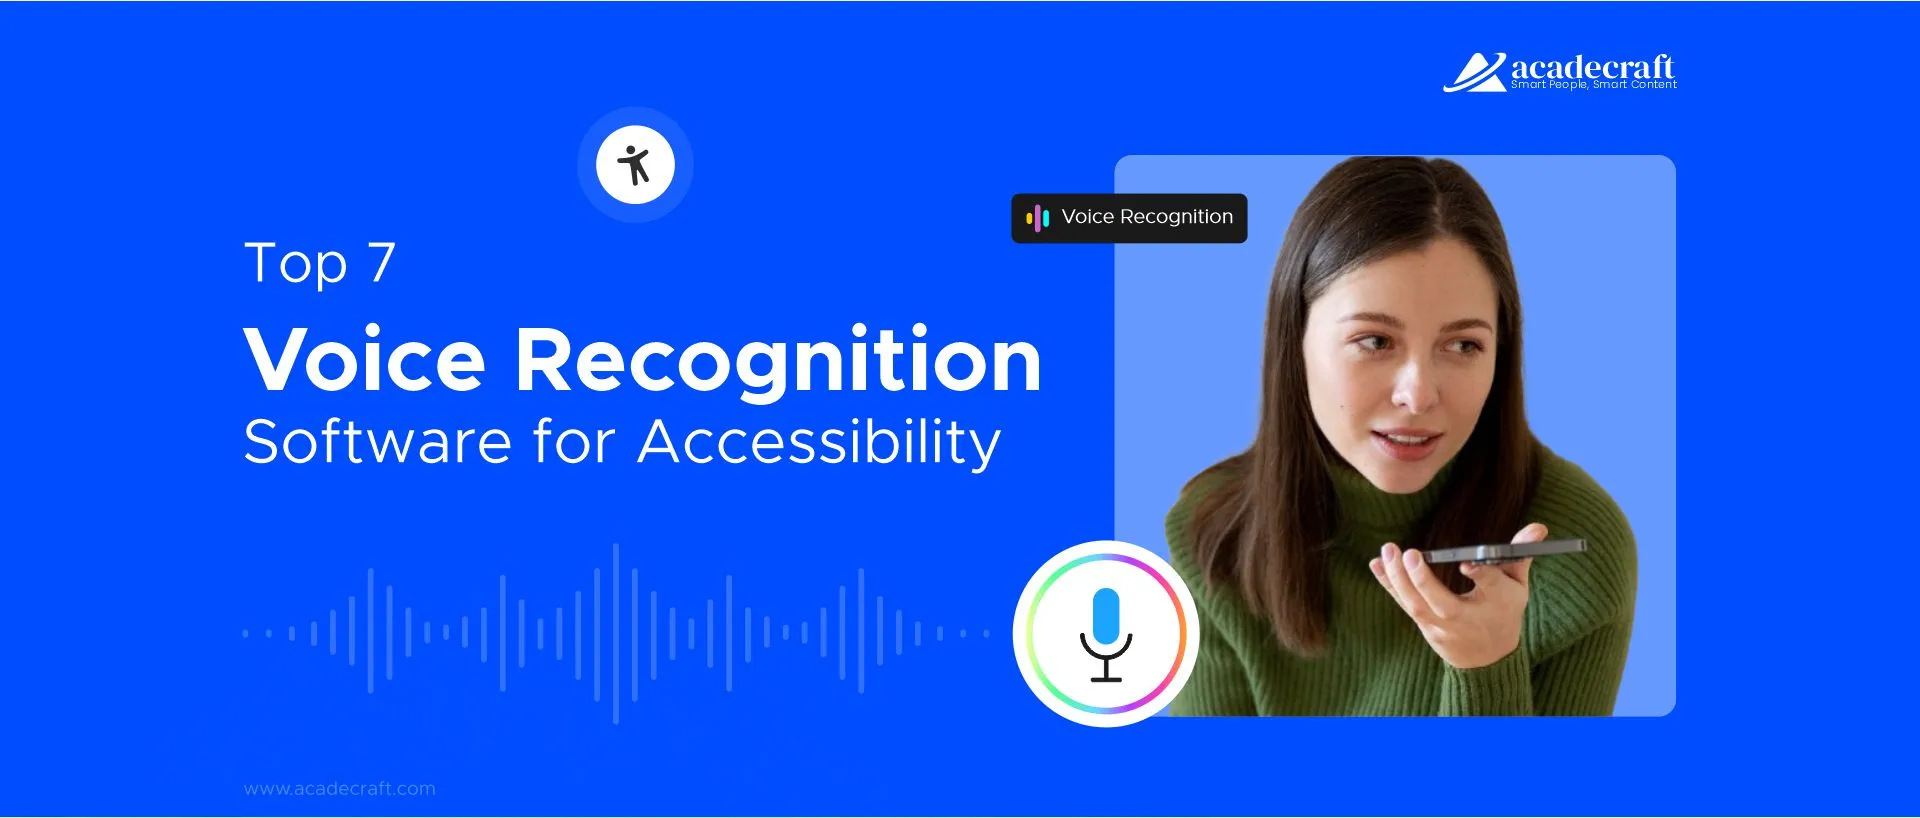 Top 7 Voice Recognition Software for Accessibility